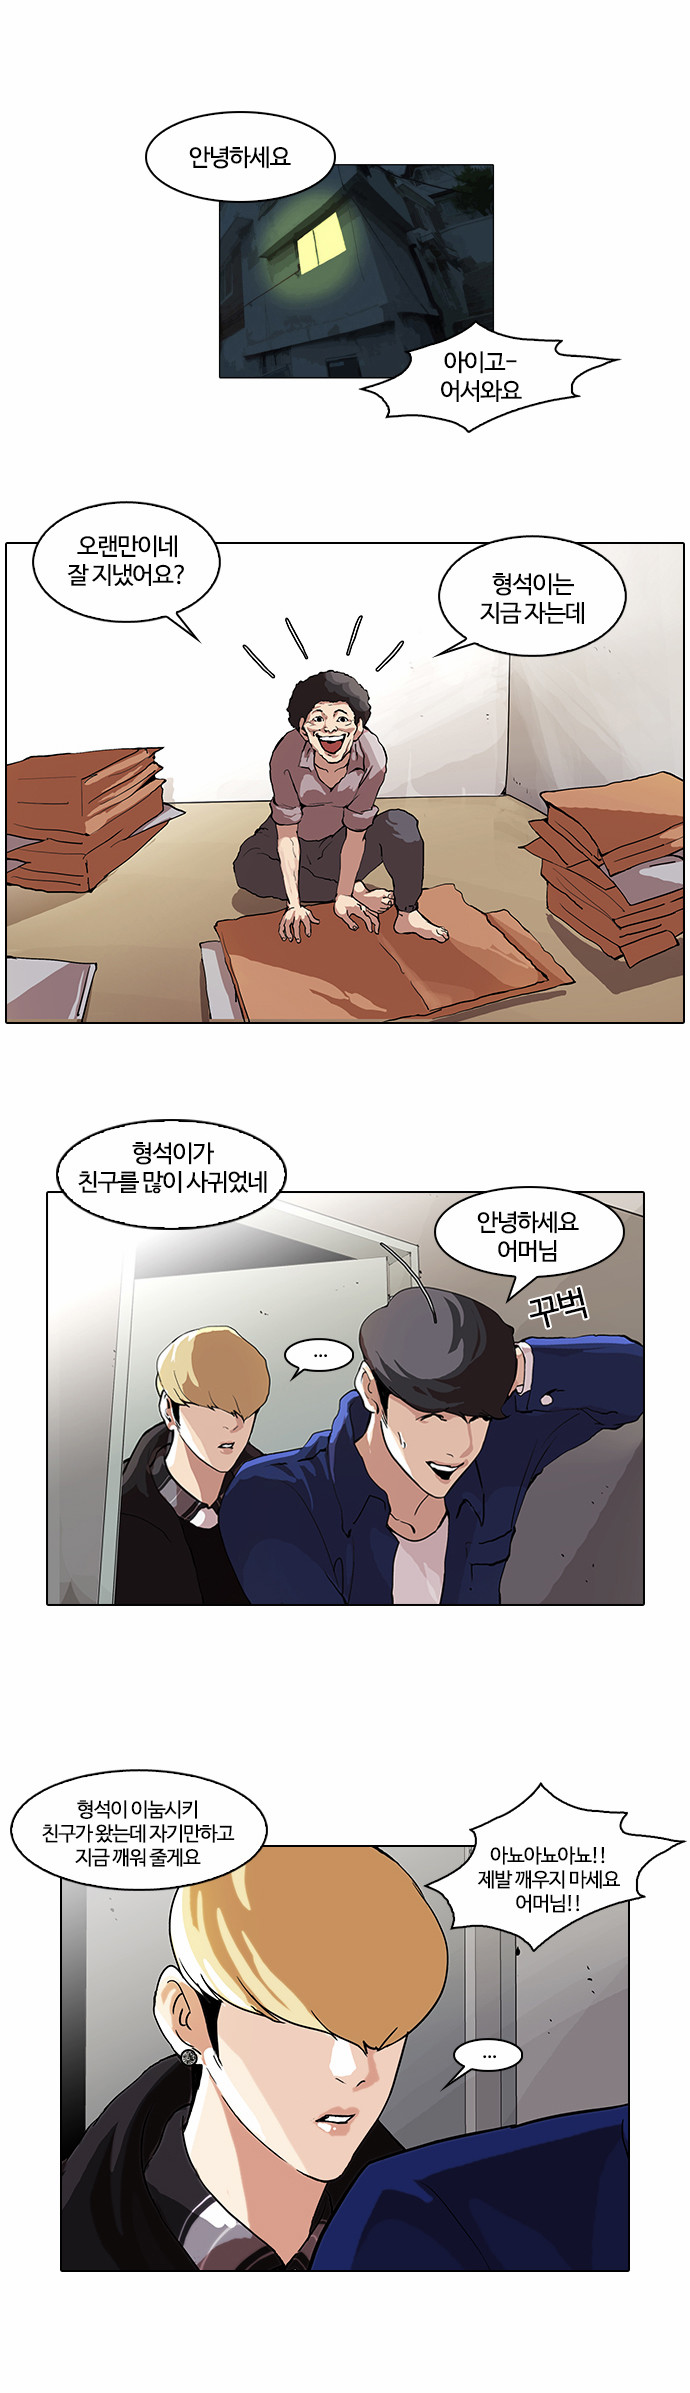 Lookism - Chapter 48 - Page 1